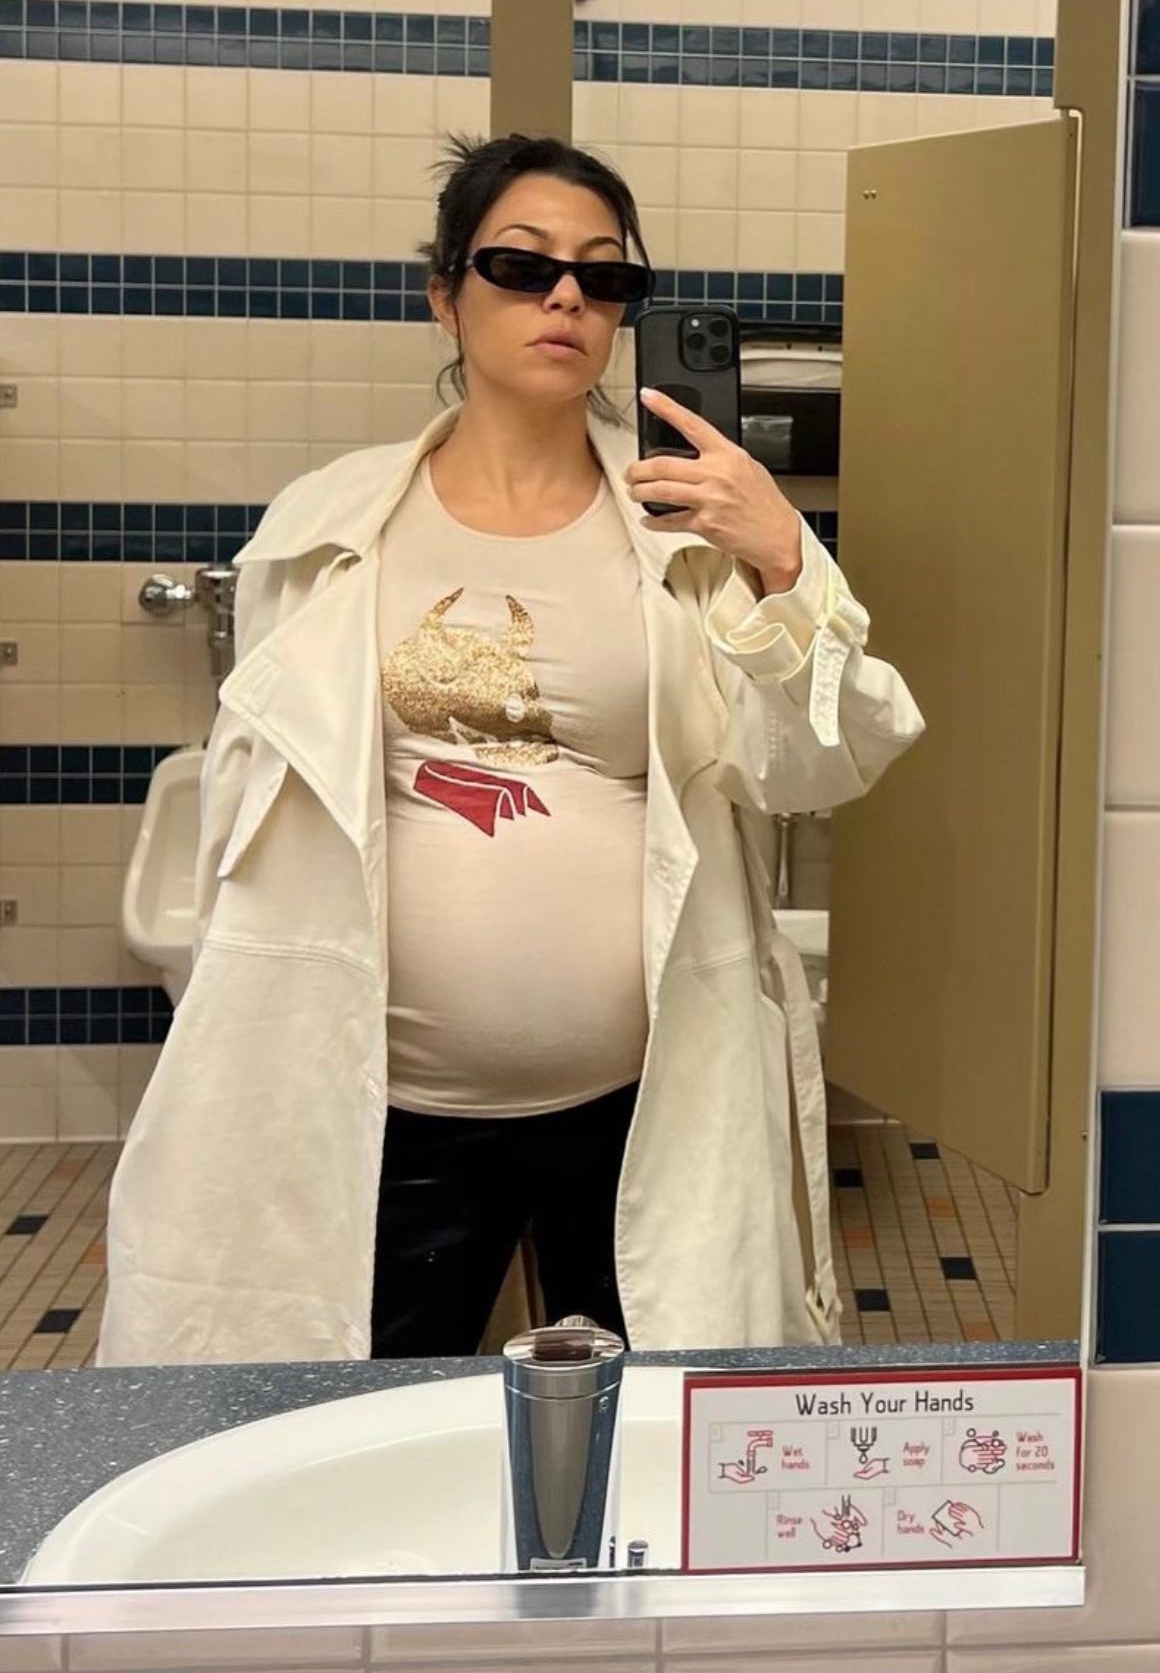 In July, a very pregnant Kourtney shared another mirror selfie in front of a toilet and urinal